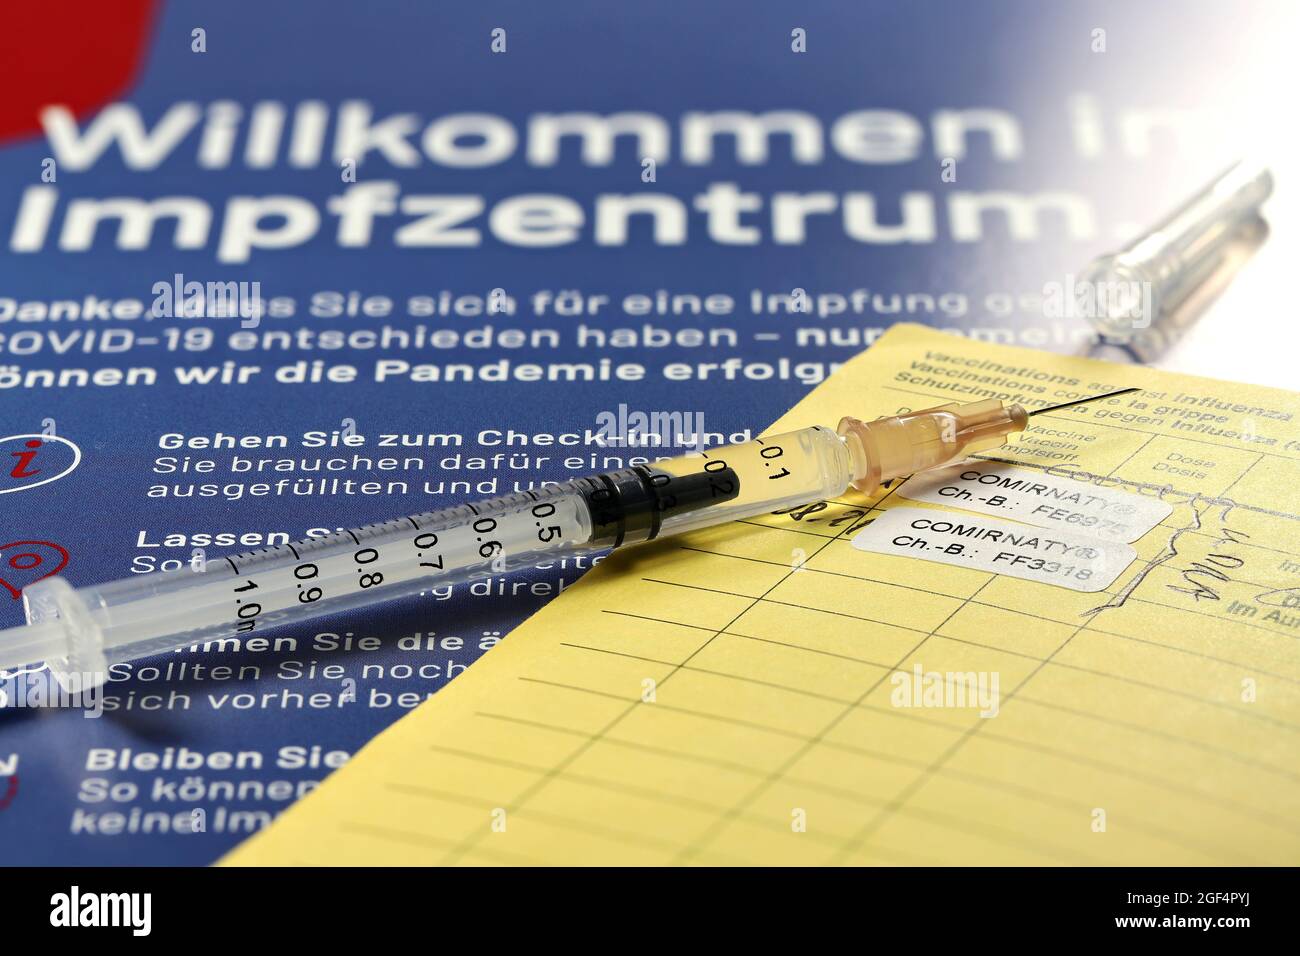 Documentation of the first and second vaccination with BioNTech/Pfizer COVID-19 vaccine Comirnaty given in a German vaccination center. Stock Photo